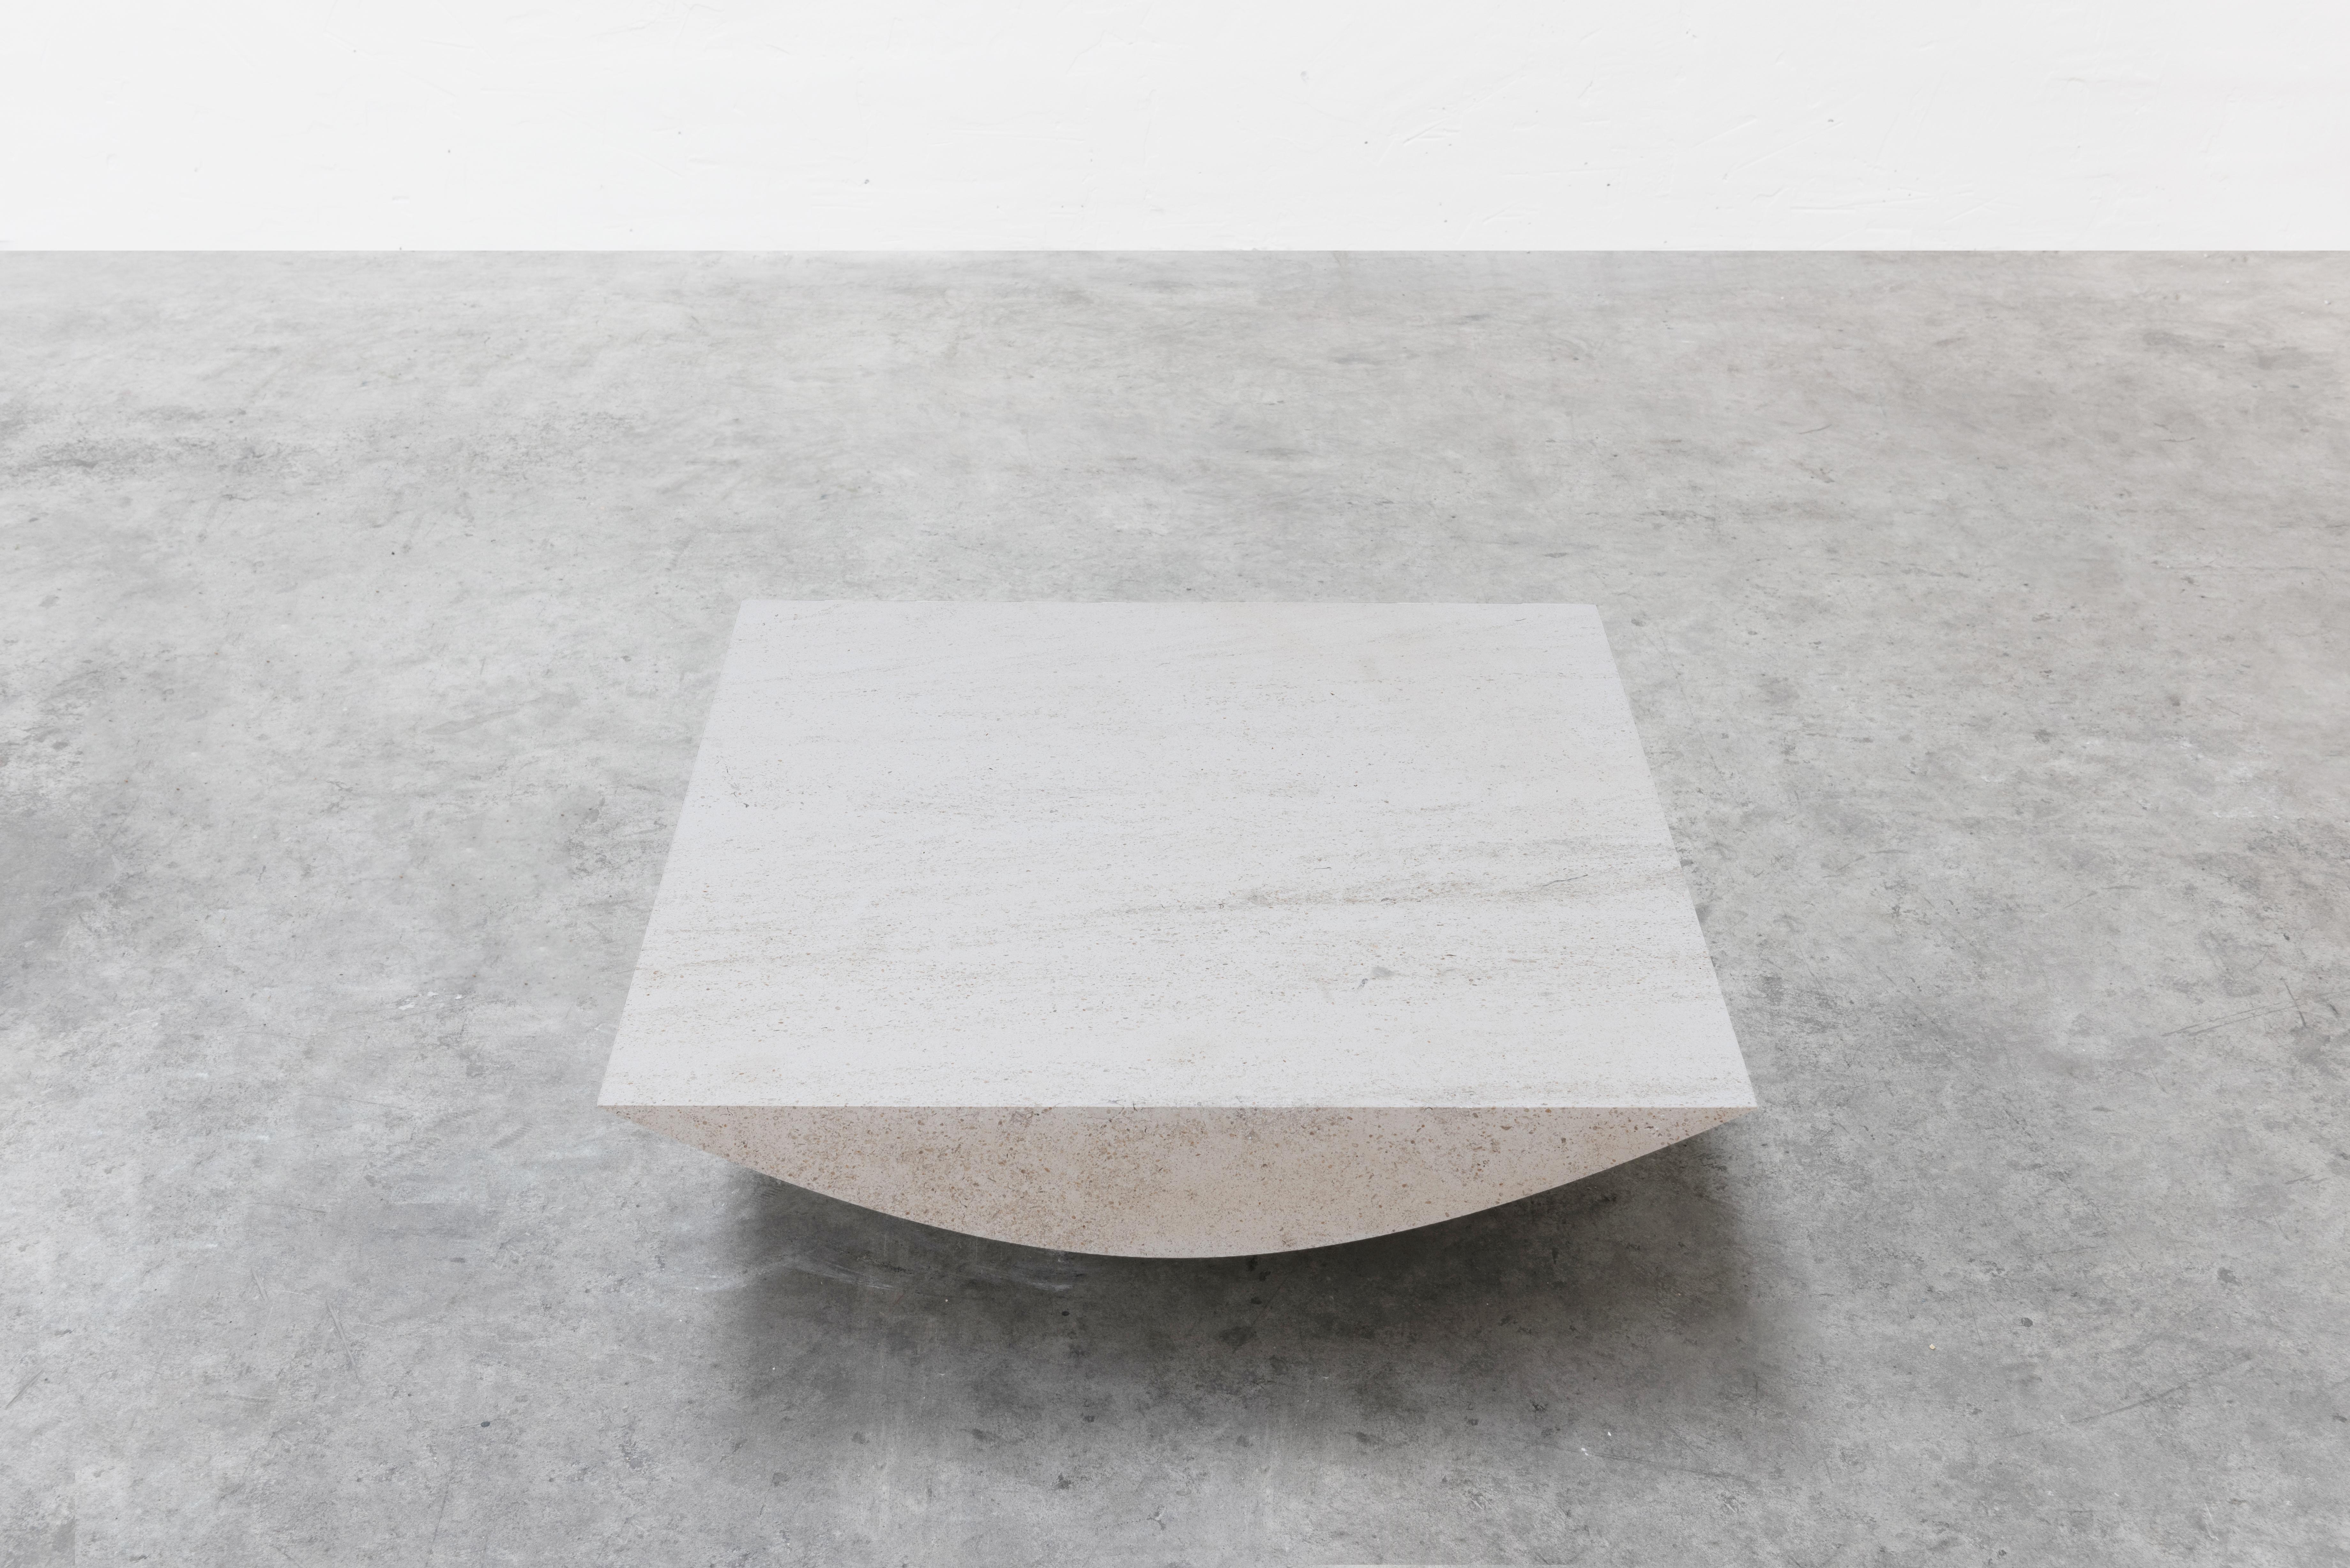 Arch buffon marble coffee table by Frédéric Saulou
Limited edition : 1 / 12
Designer: Frederic Saulou
Materials: Ornemental Limestone Buffon.
Dimensions: L 80 x W 80 x H 30 cm

Born in 1989, Frédéric Saulou, lives and works in Rennes, in